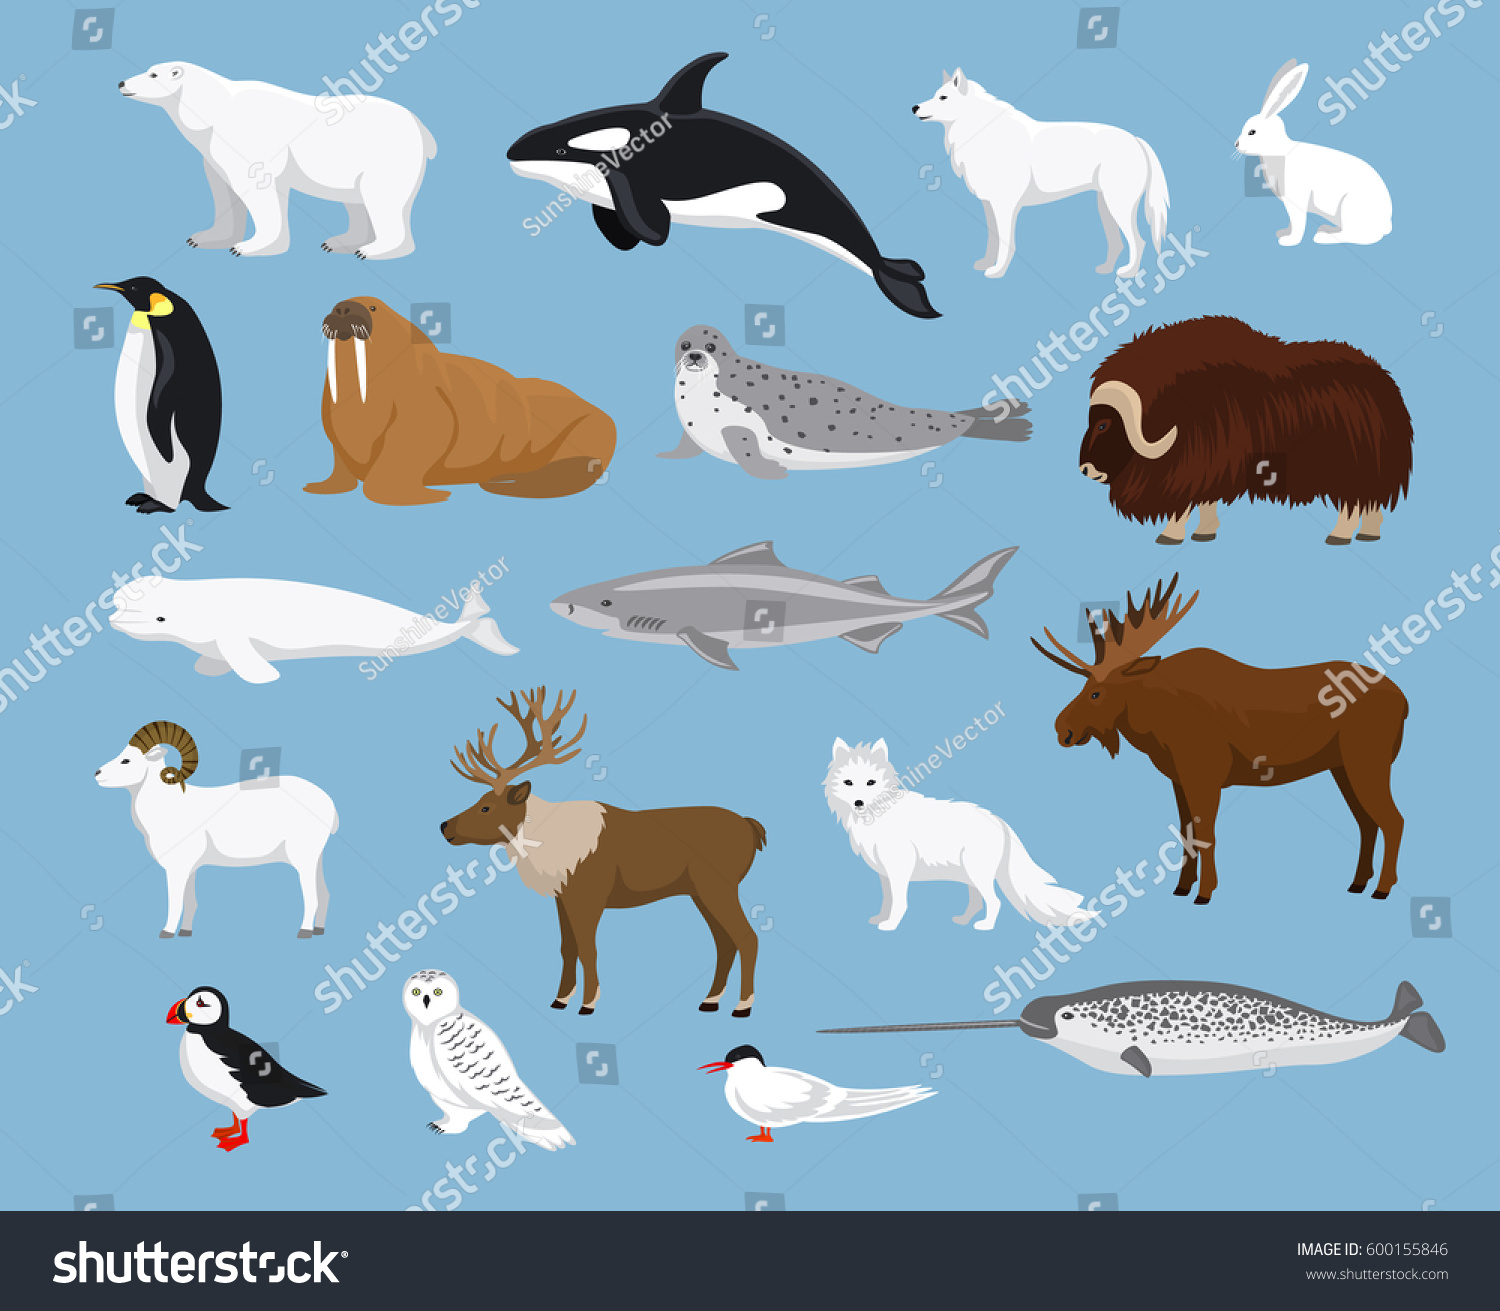 SVG of Arctic animals collection with reindeer, orca, narwhal, shark, musk ox, fox, wold, puffin, tern, moose, walrus, penguin, beluga whale, hare, polar bear, harp seal, dall sheep, snowy owl svg